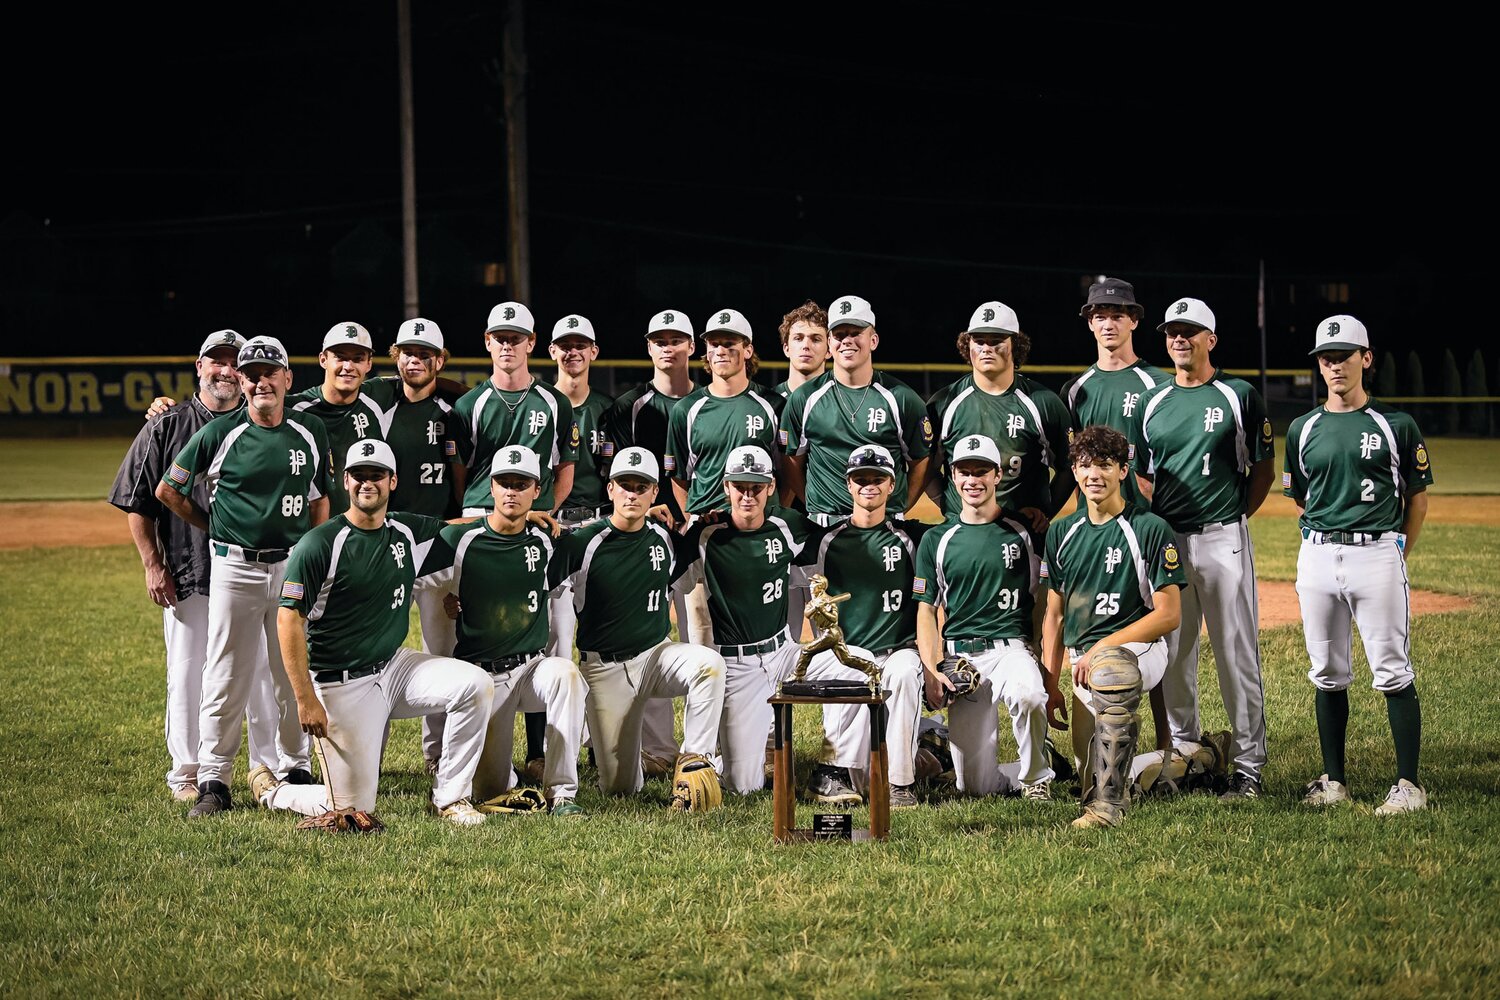 The Pennridge team after winning the Bux-Mont American Legion trophy.